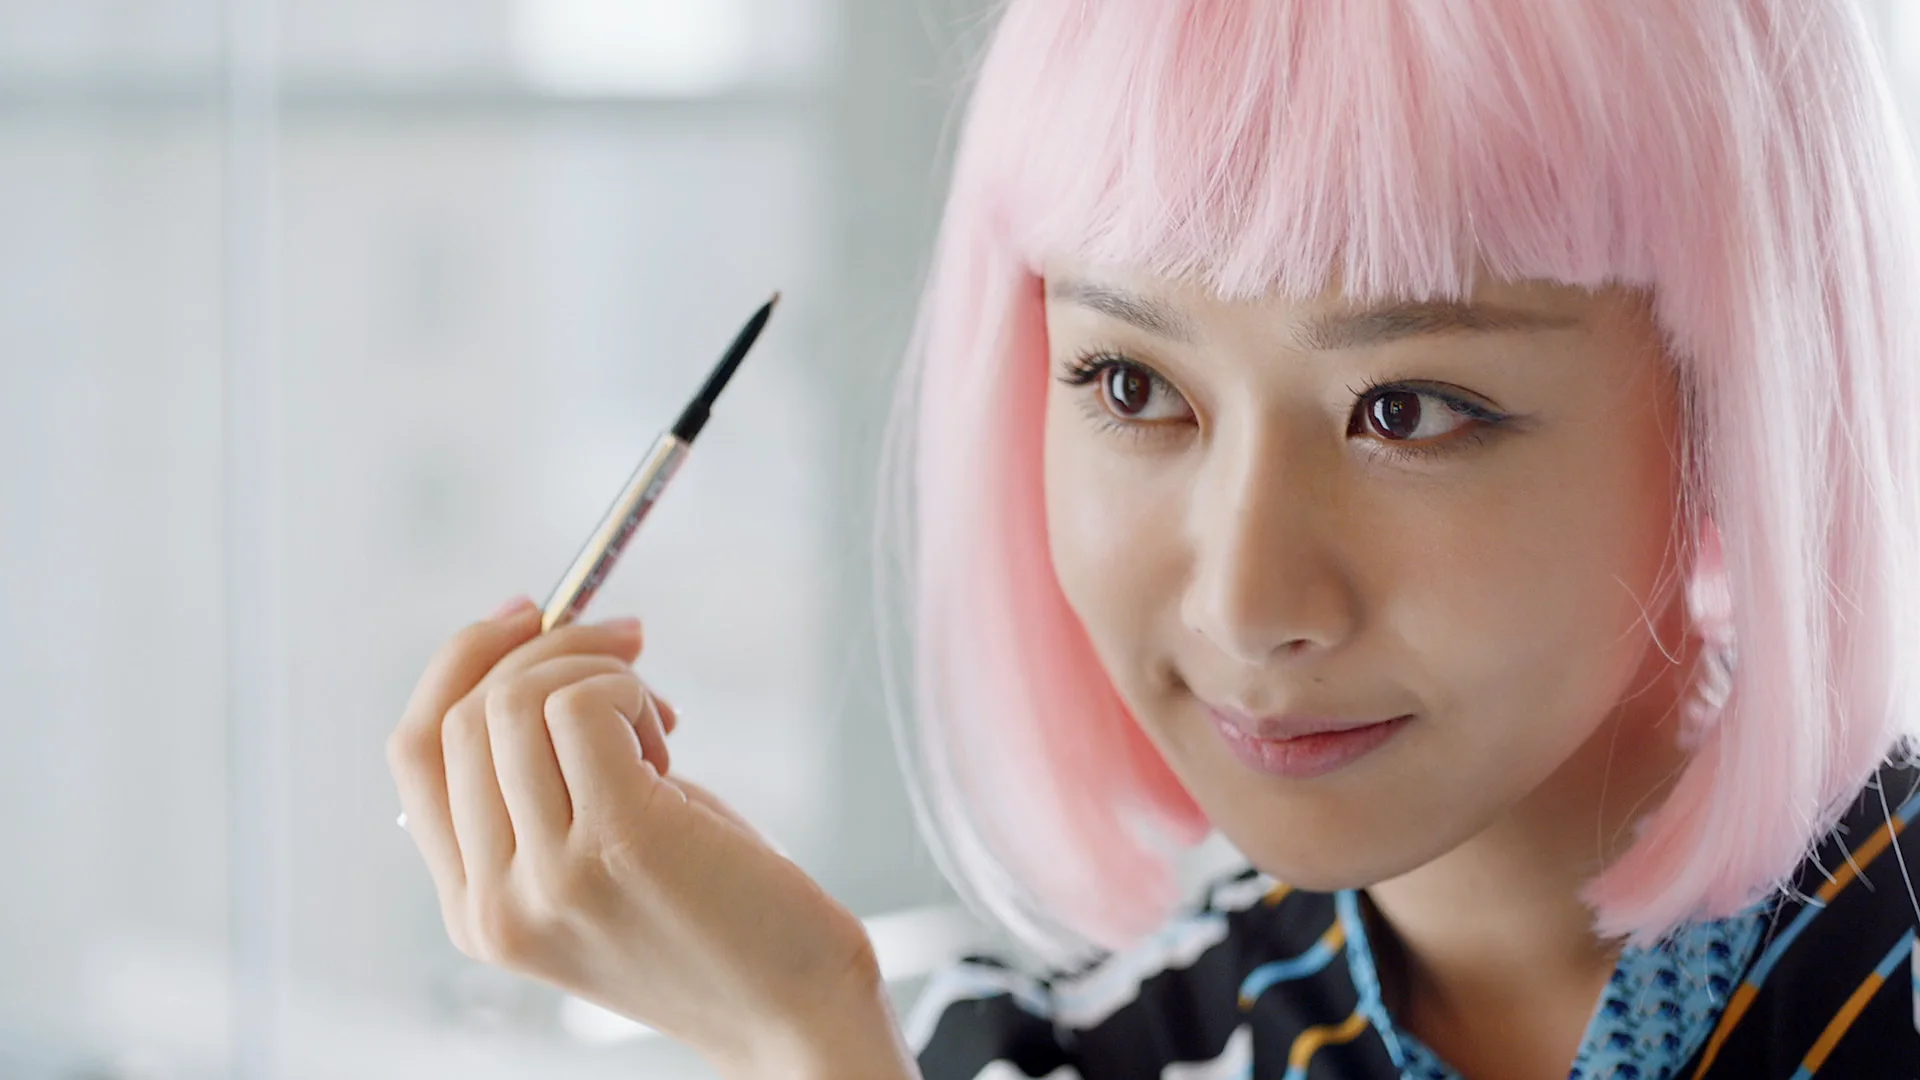 Brand Access featuring Benefit ABC (About Benefit Cosmetics) on Vimeo